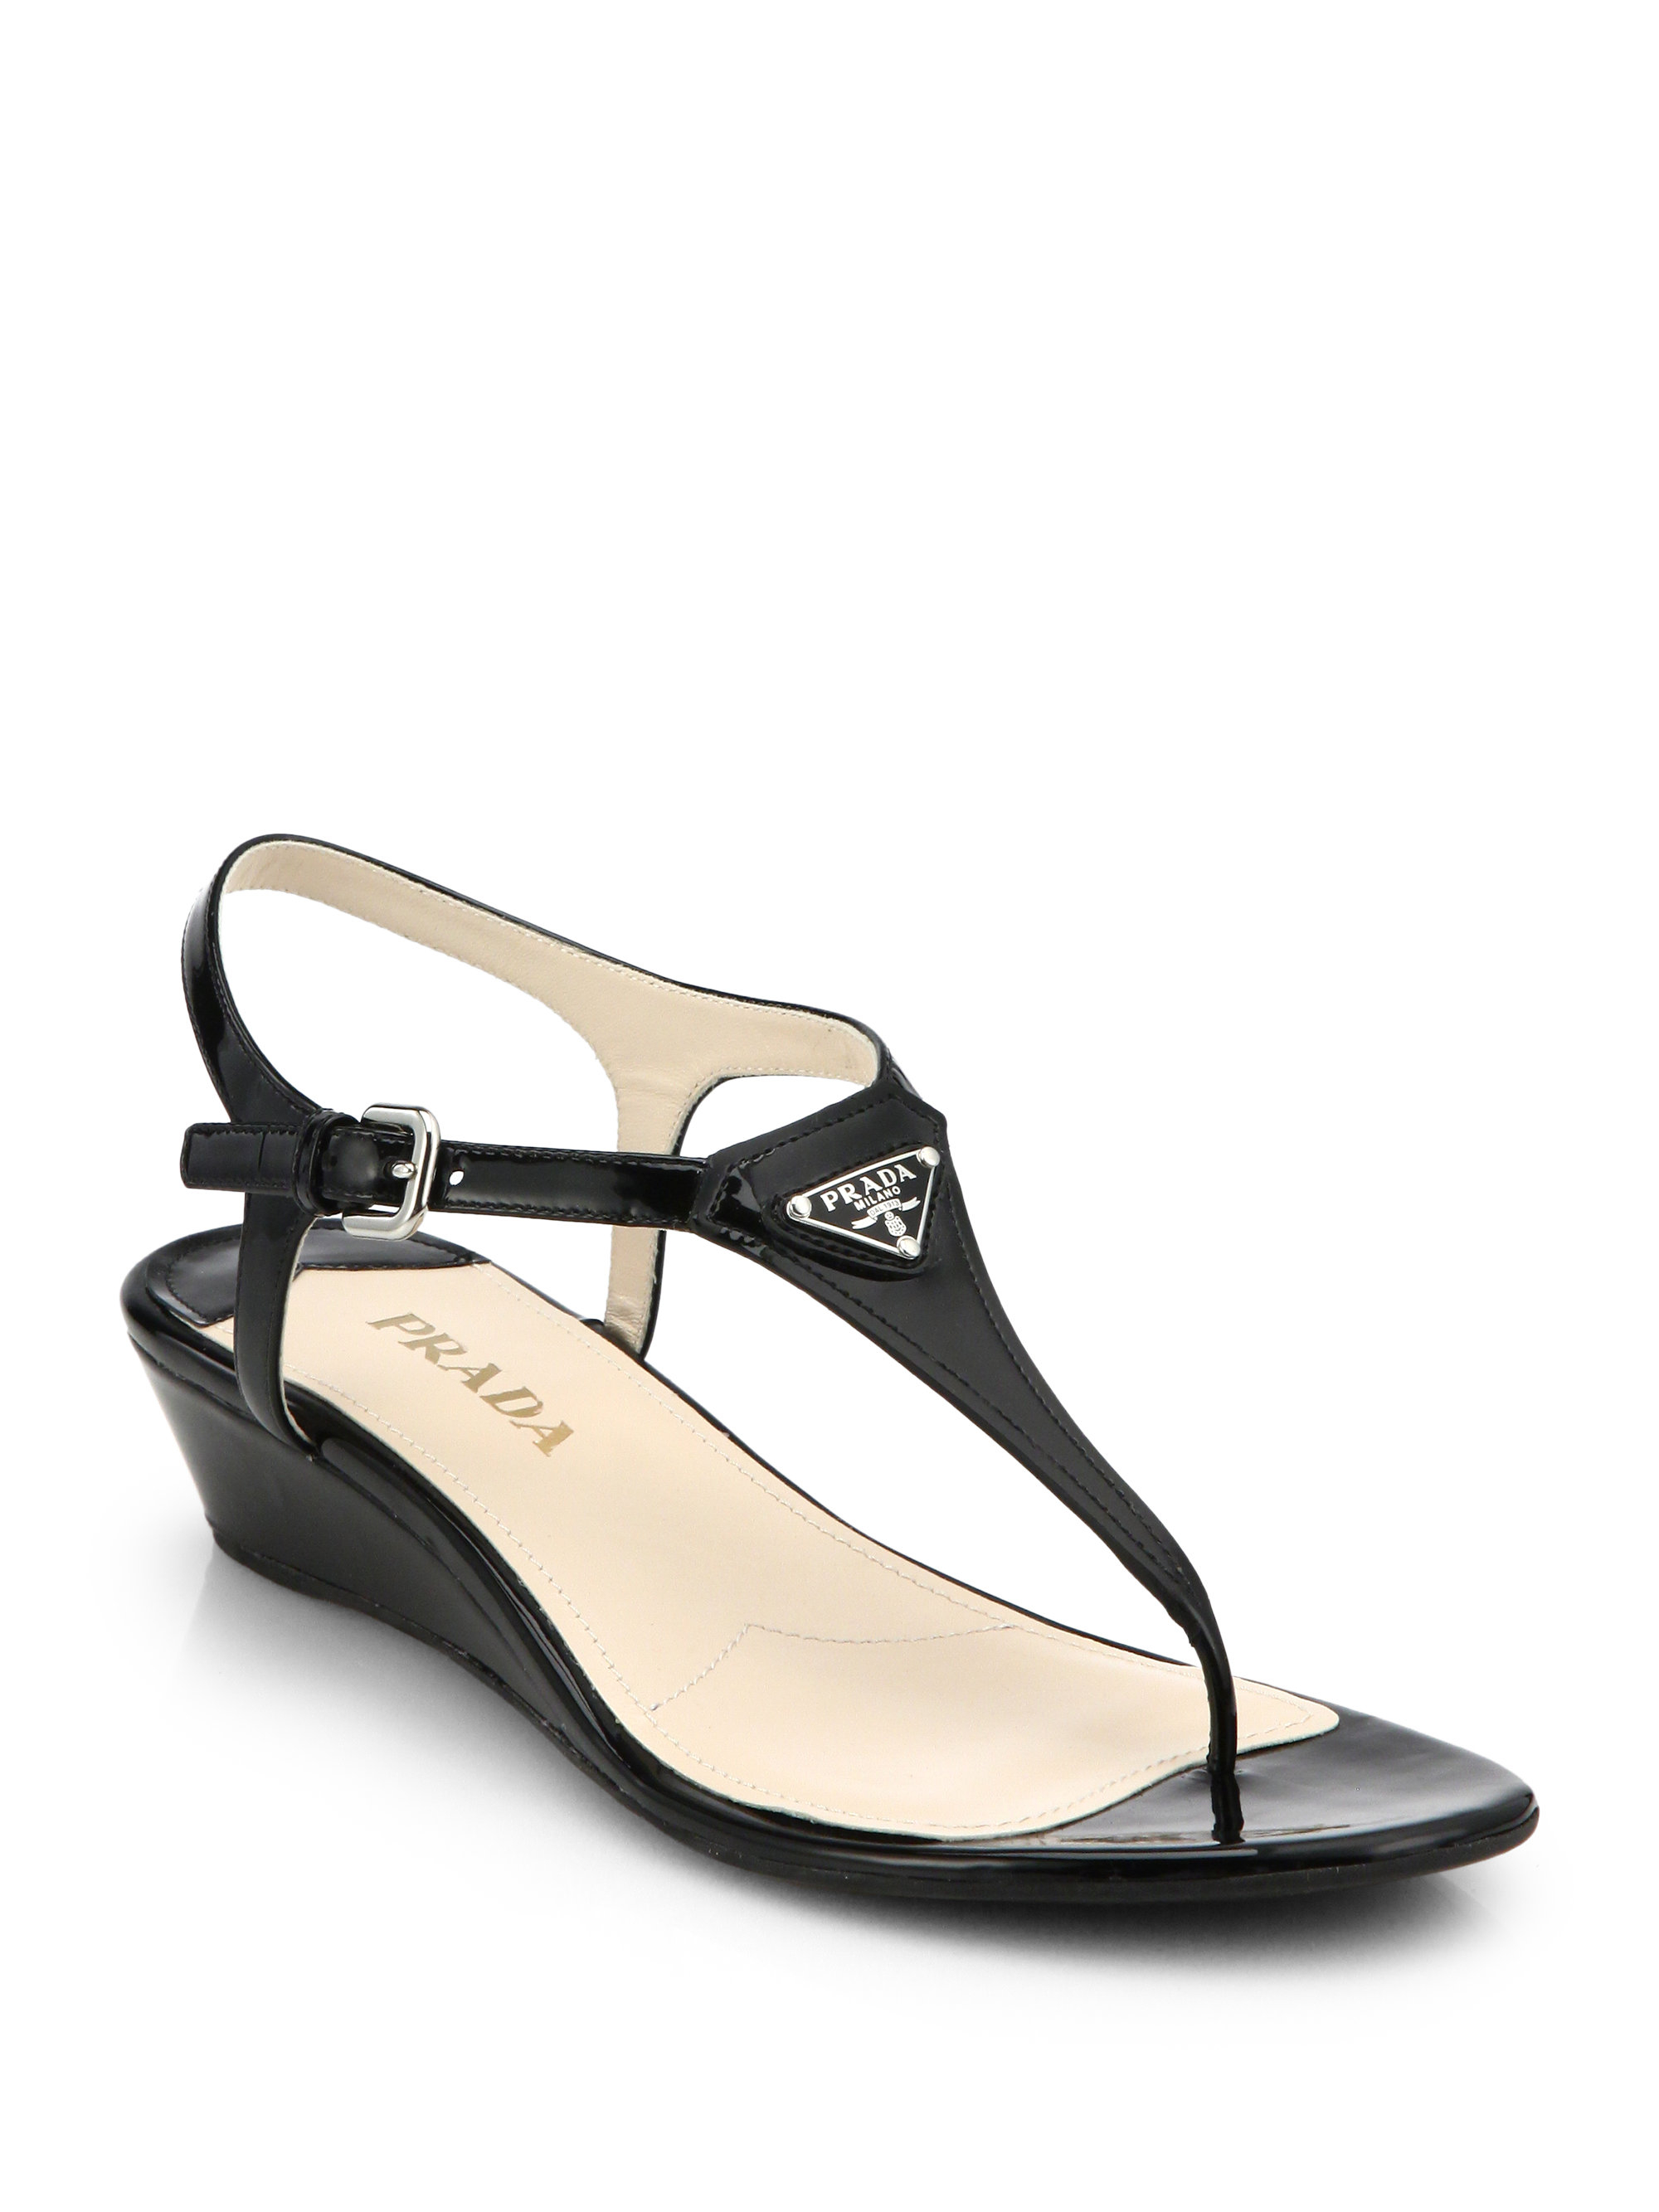 Prada Patent Leather Wedge Thong Sandals in Black | Lyst